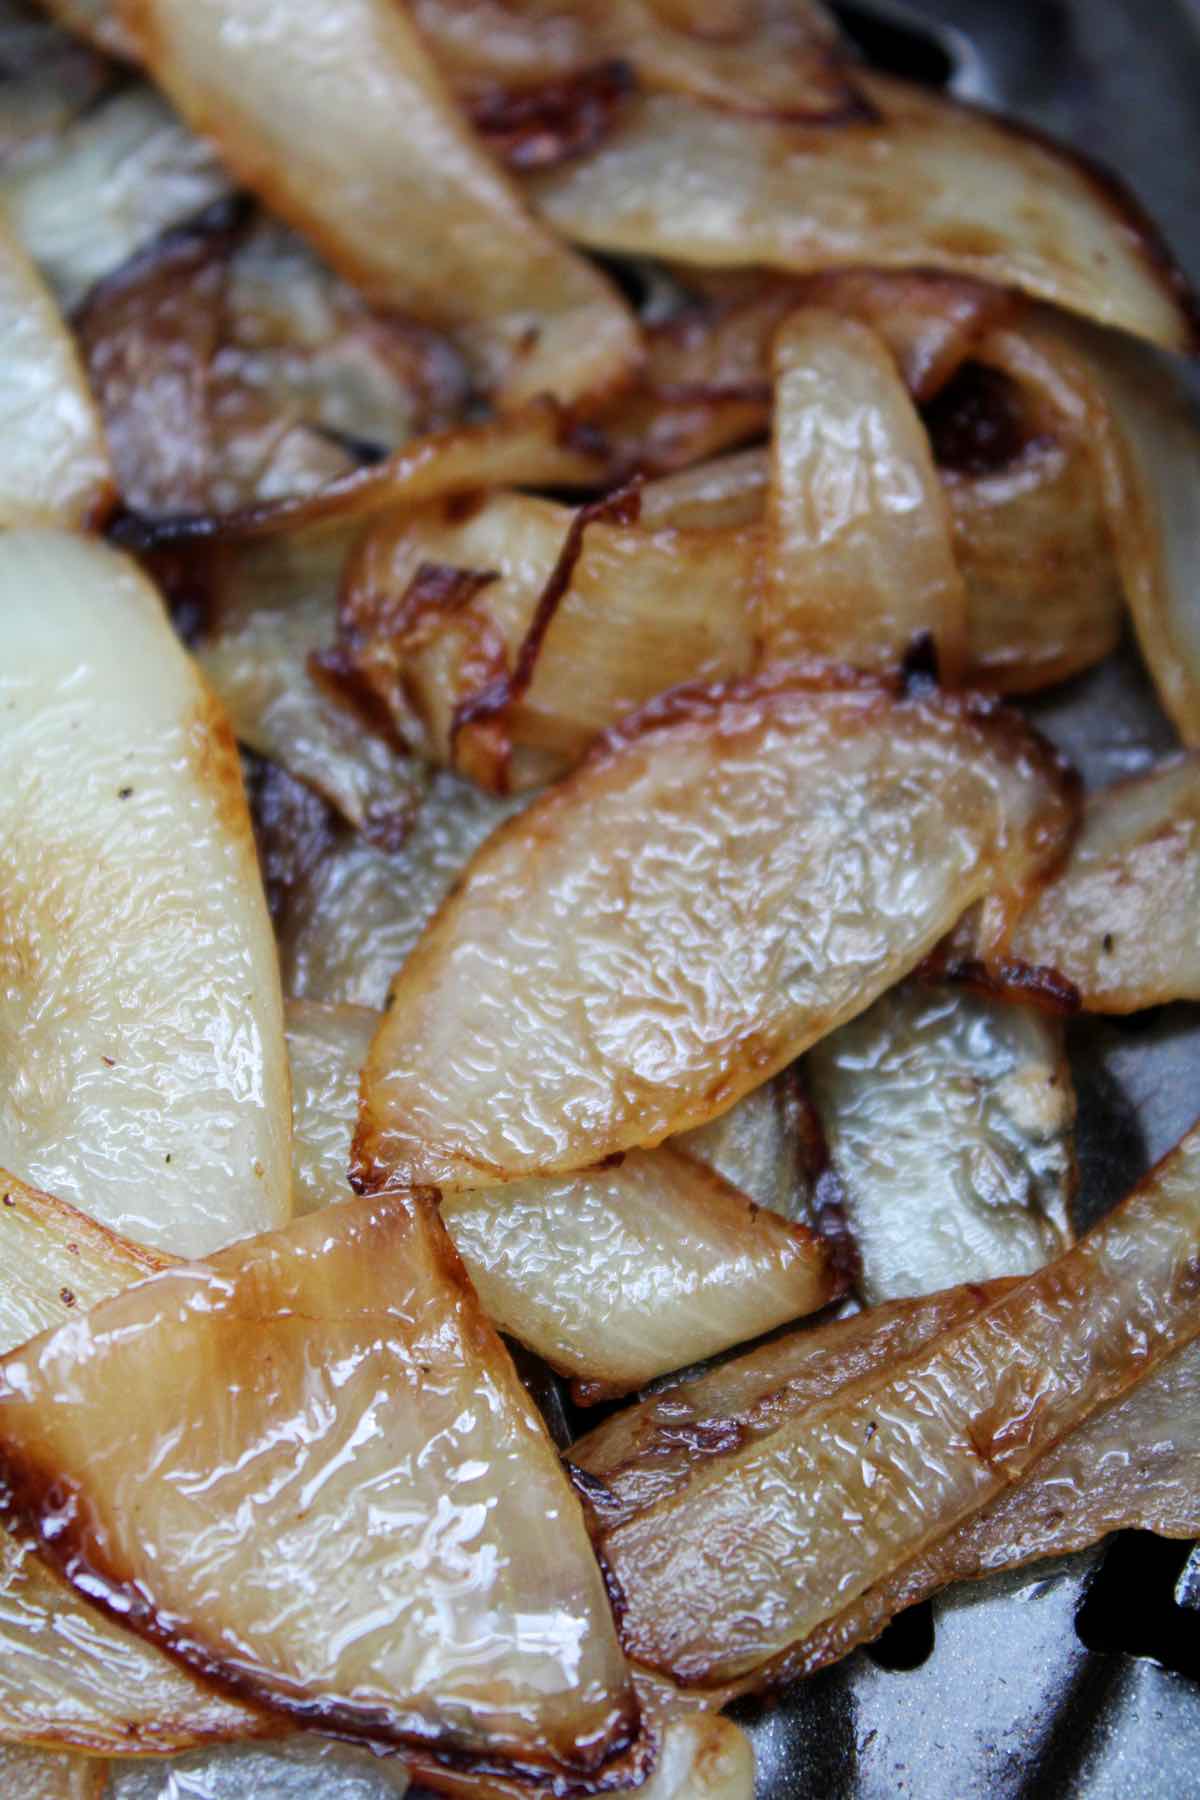 Top your favorite sandwiches and burgers with these air fryer caramelized onions.